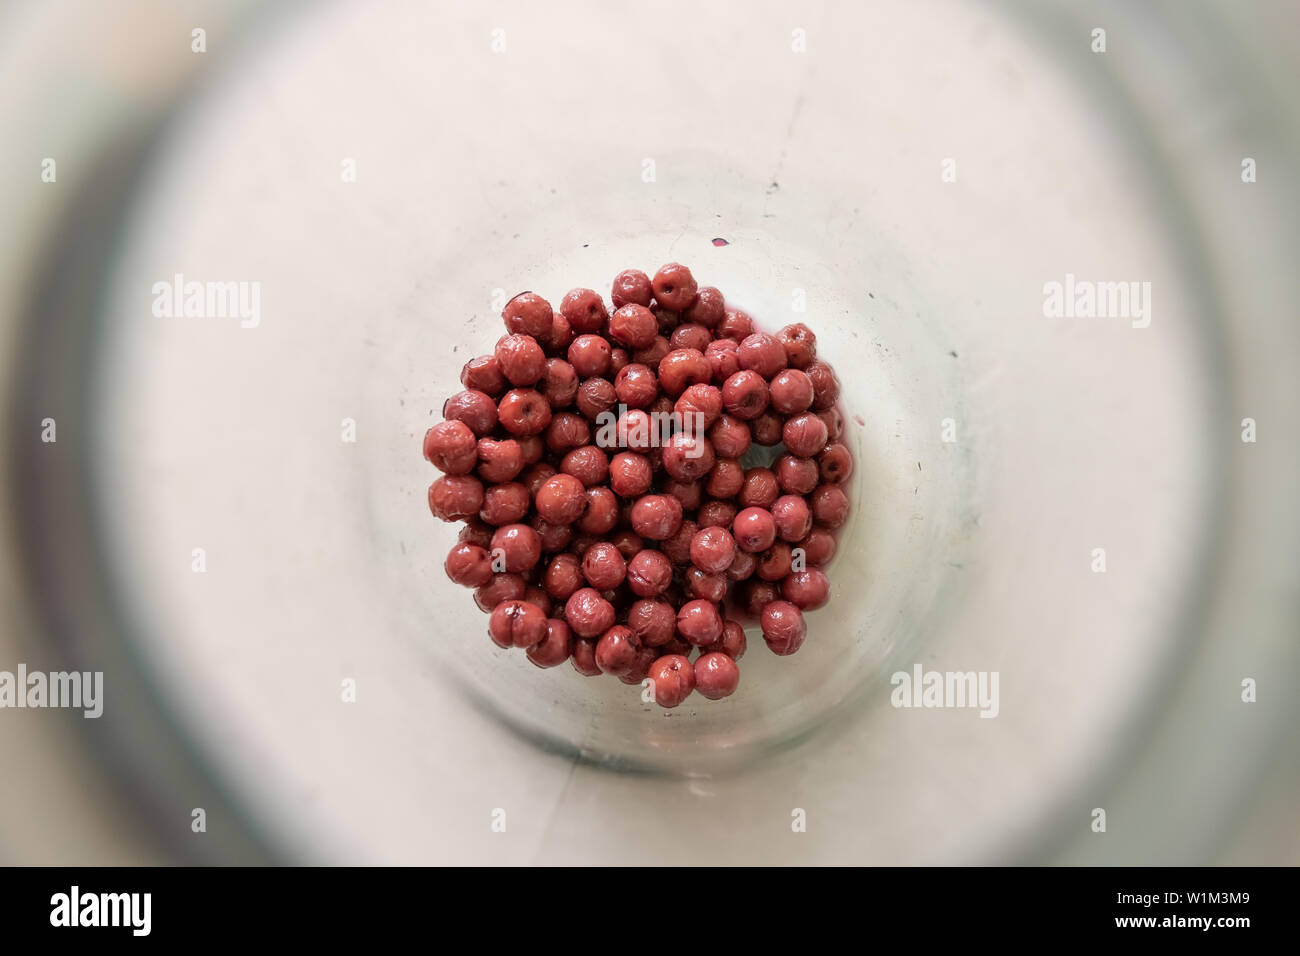 description: Berries in a glass jar of compote. Harvest. Blueberries, red currants and cherries. Stock Photo